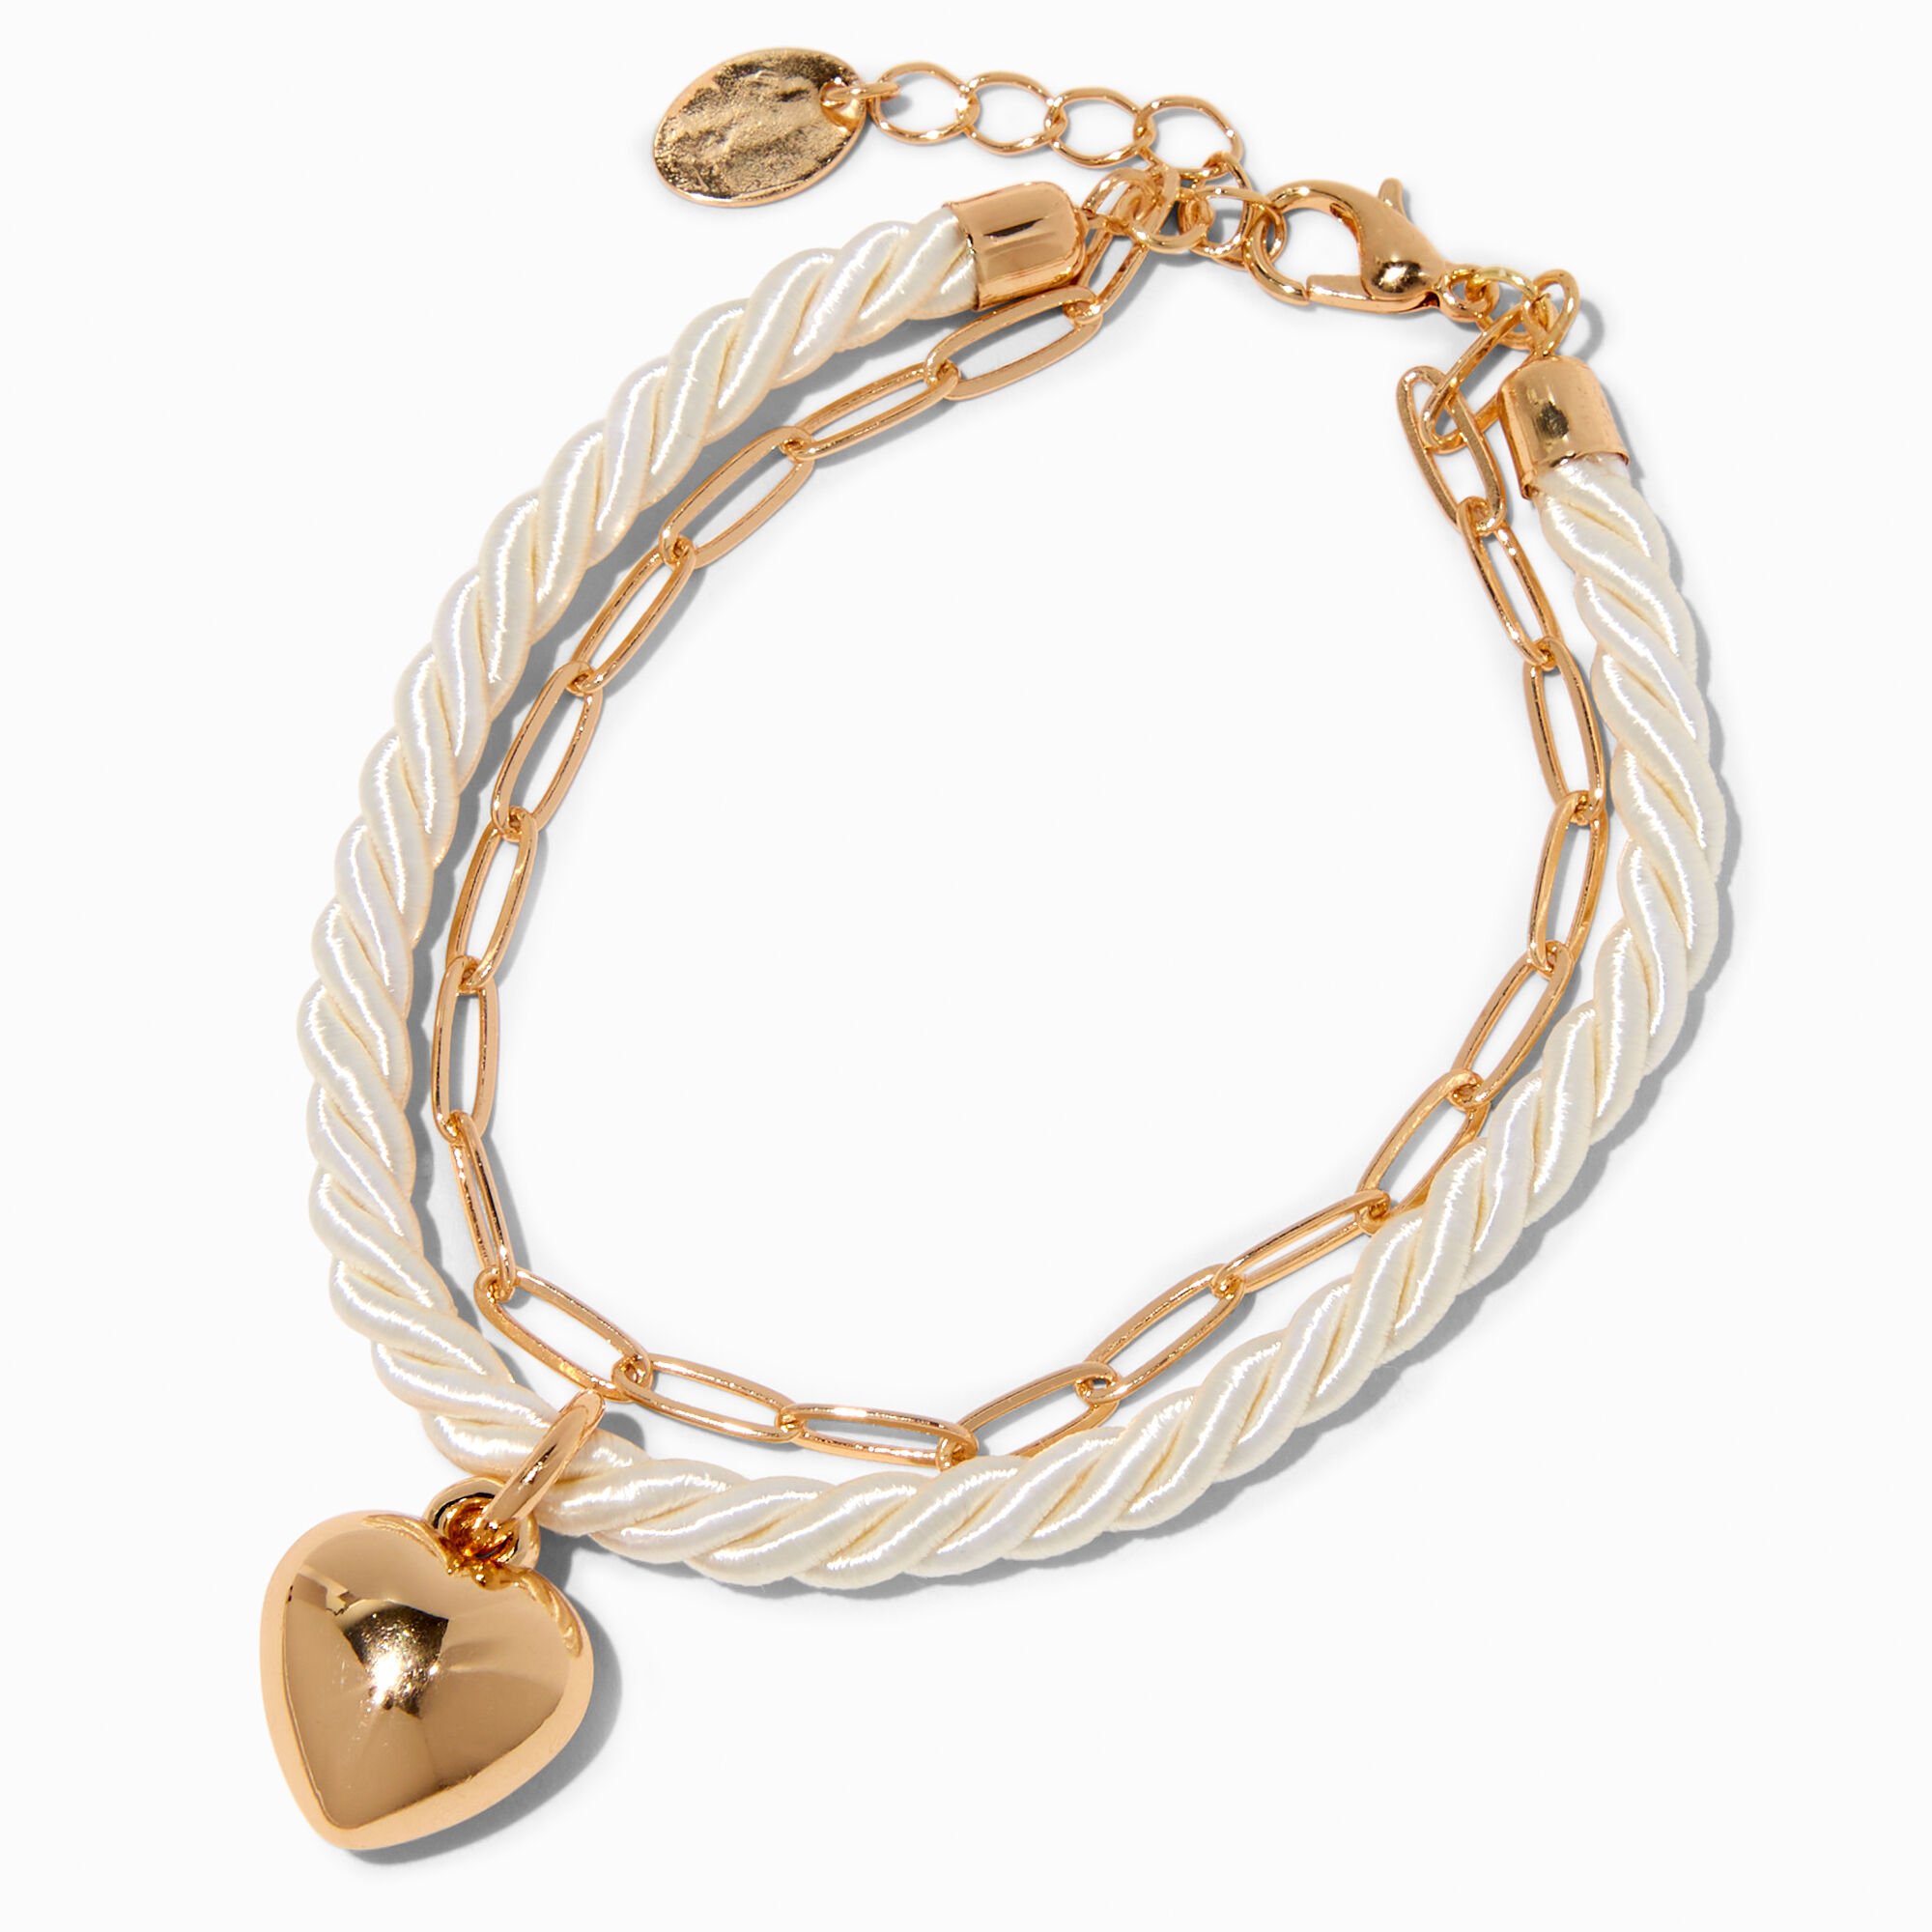 View Claires GoldTone Heart Charm Twisted Rope Bracelet Ivory information